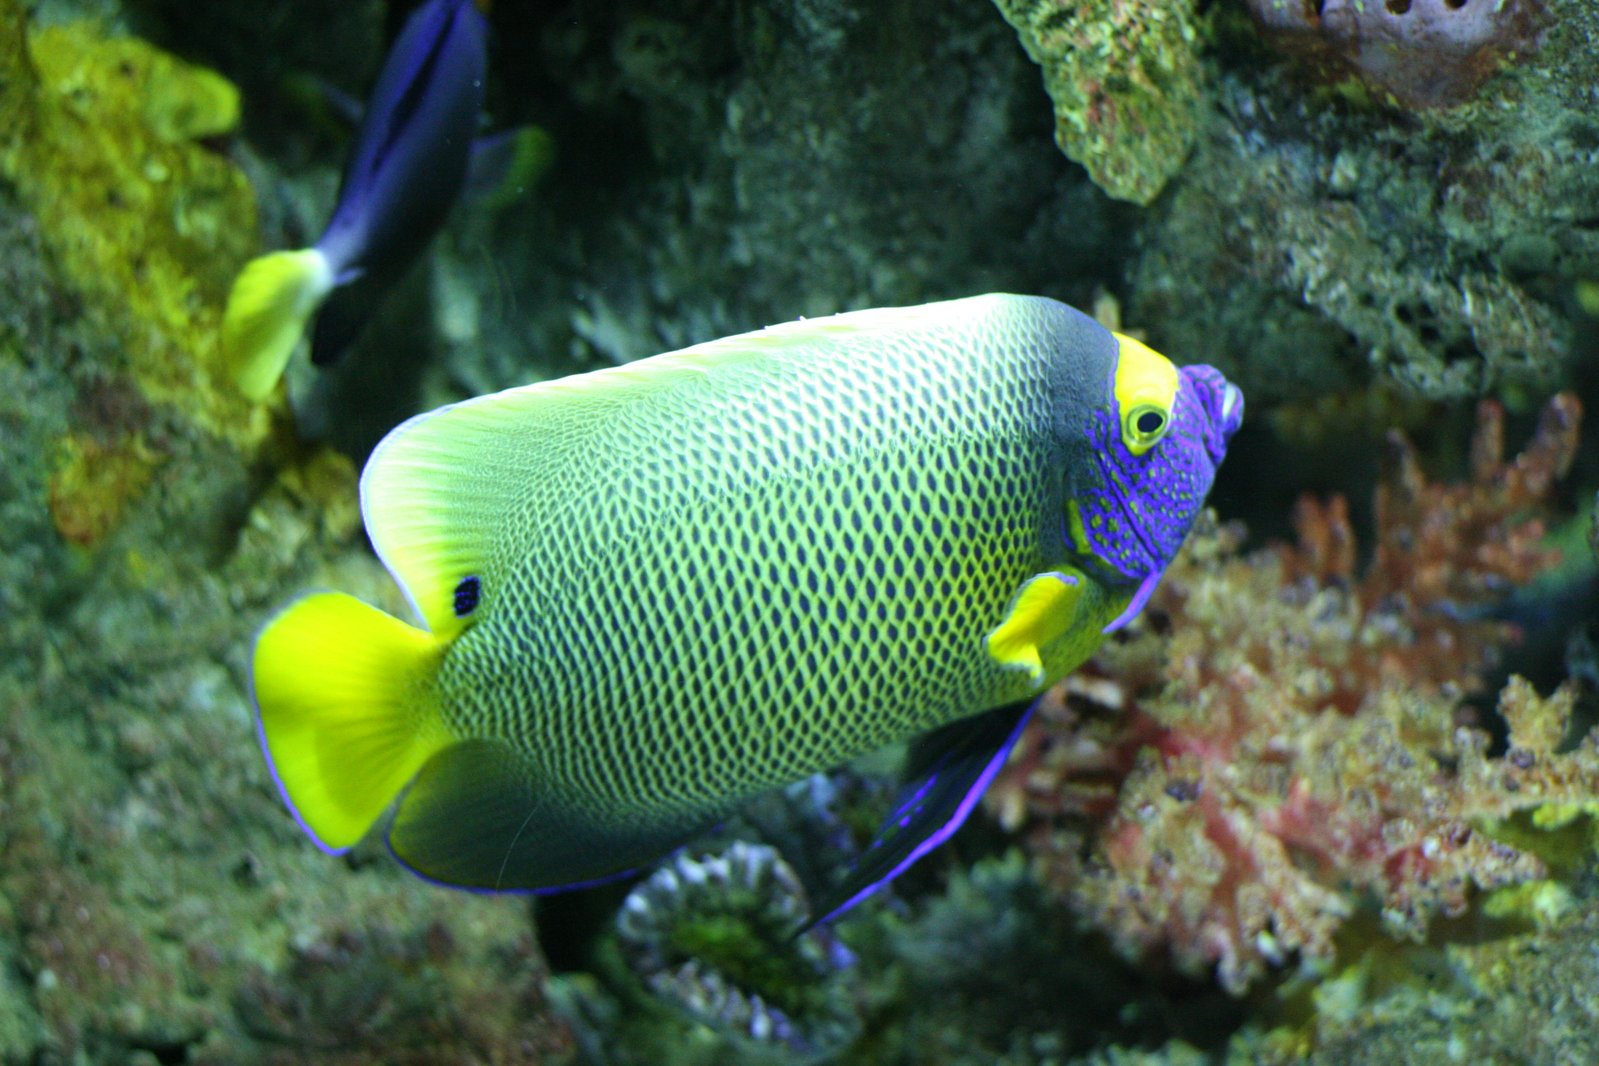 a colorful yellow and purple fish in an aquarium